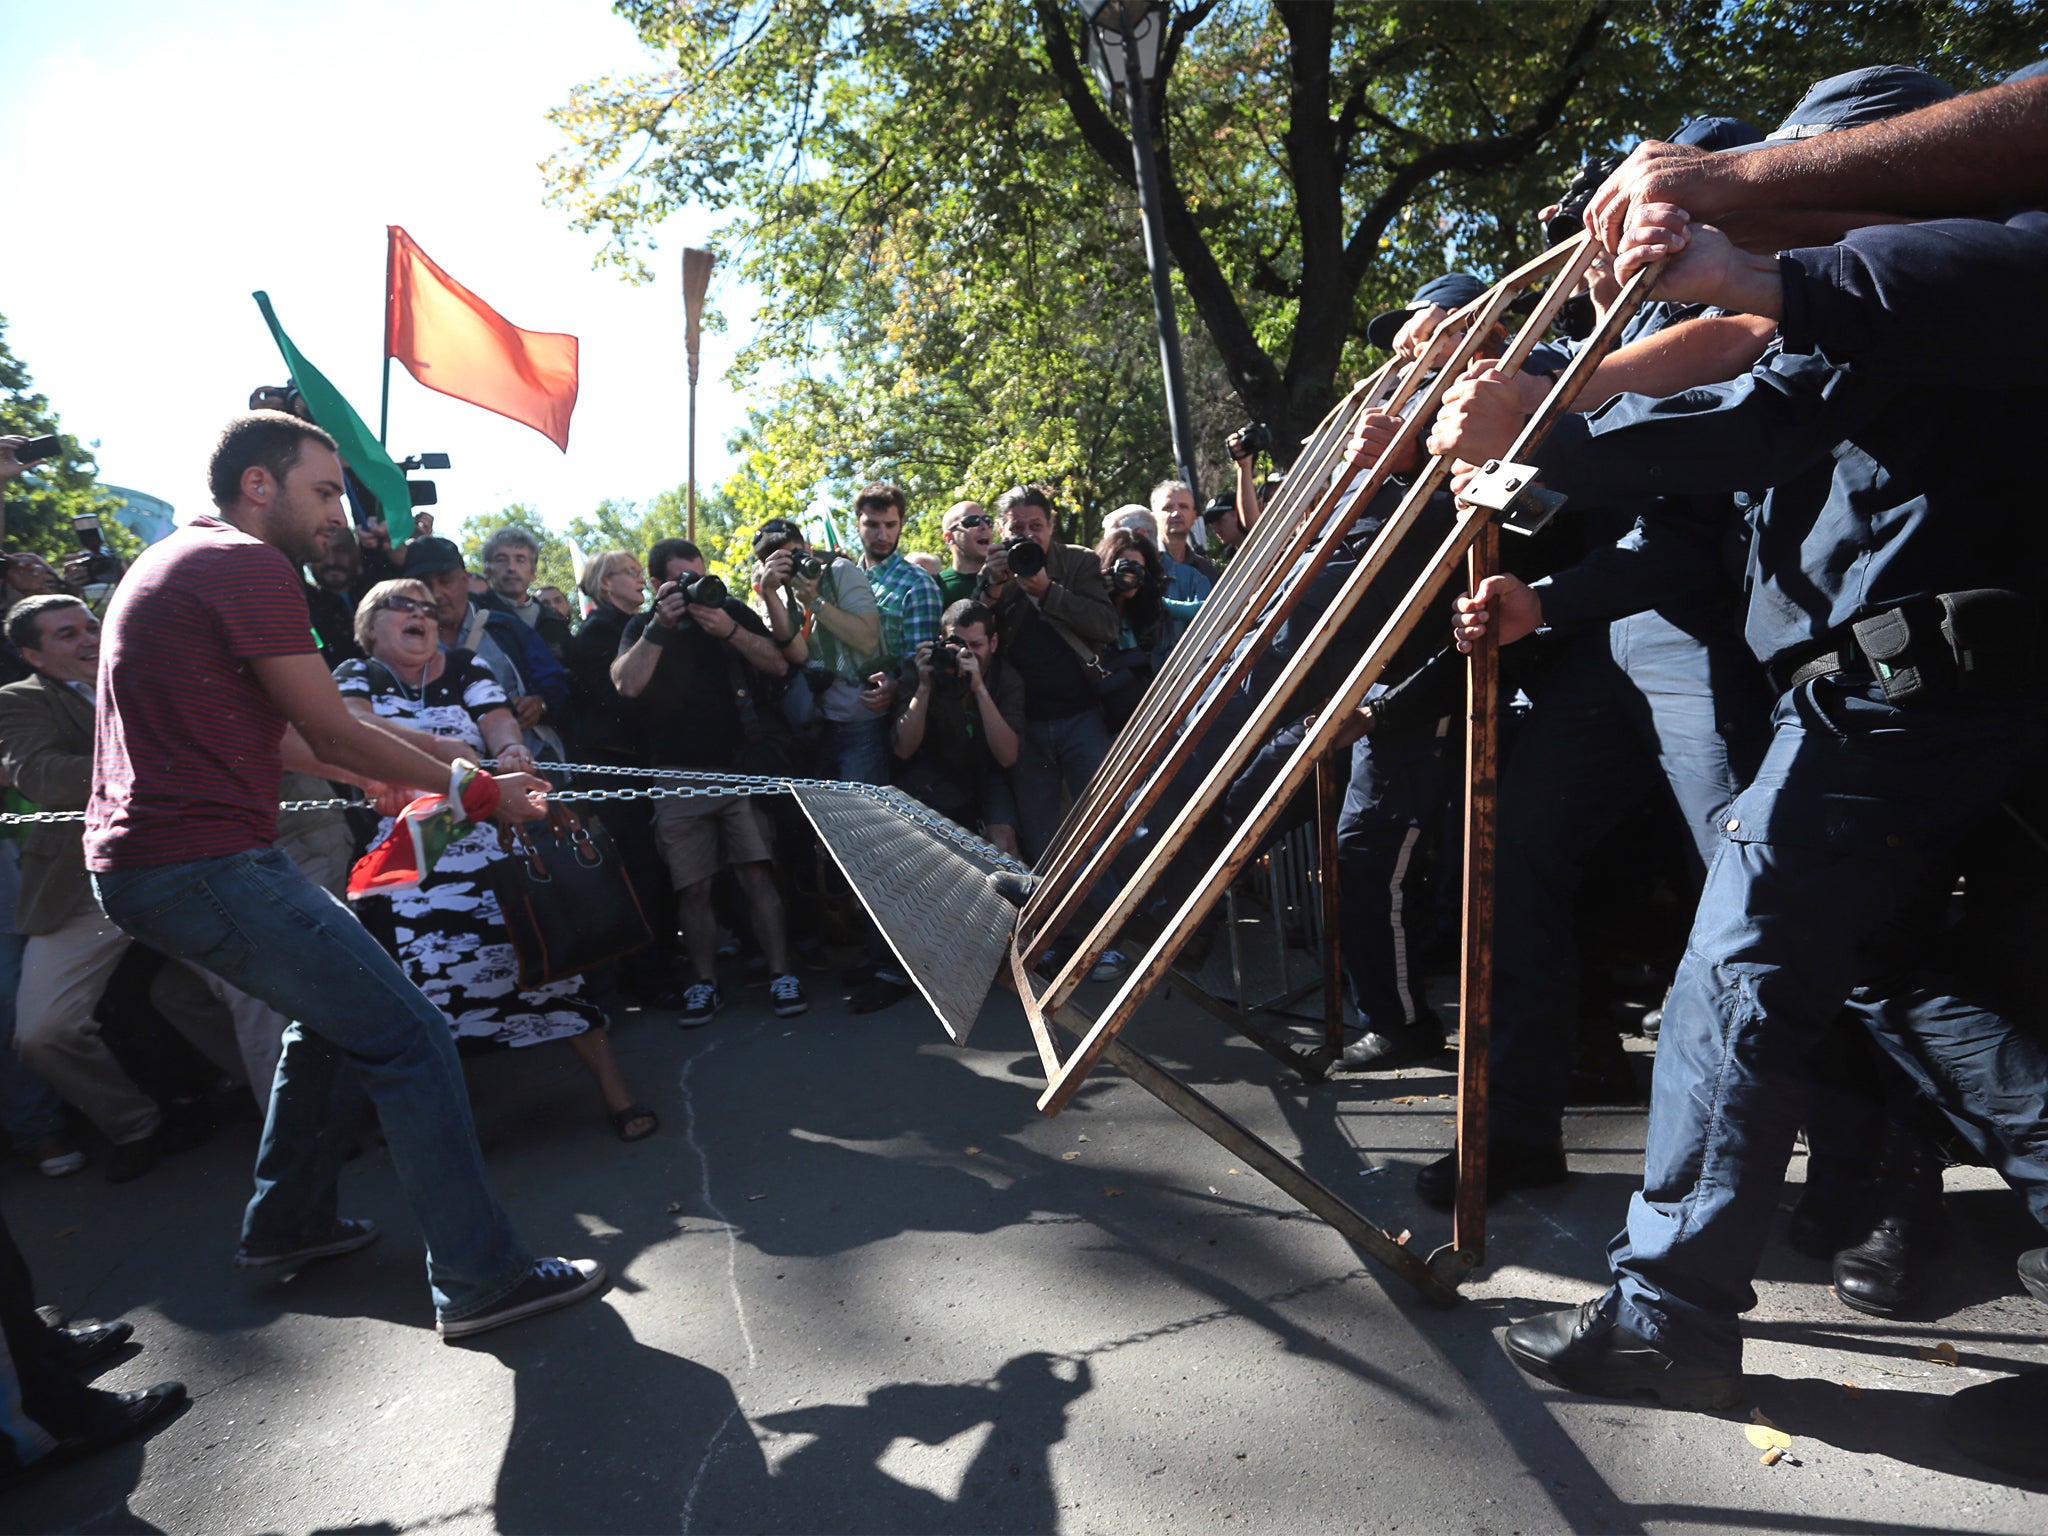 Protesters and police struggle over a fence near parliament